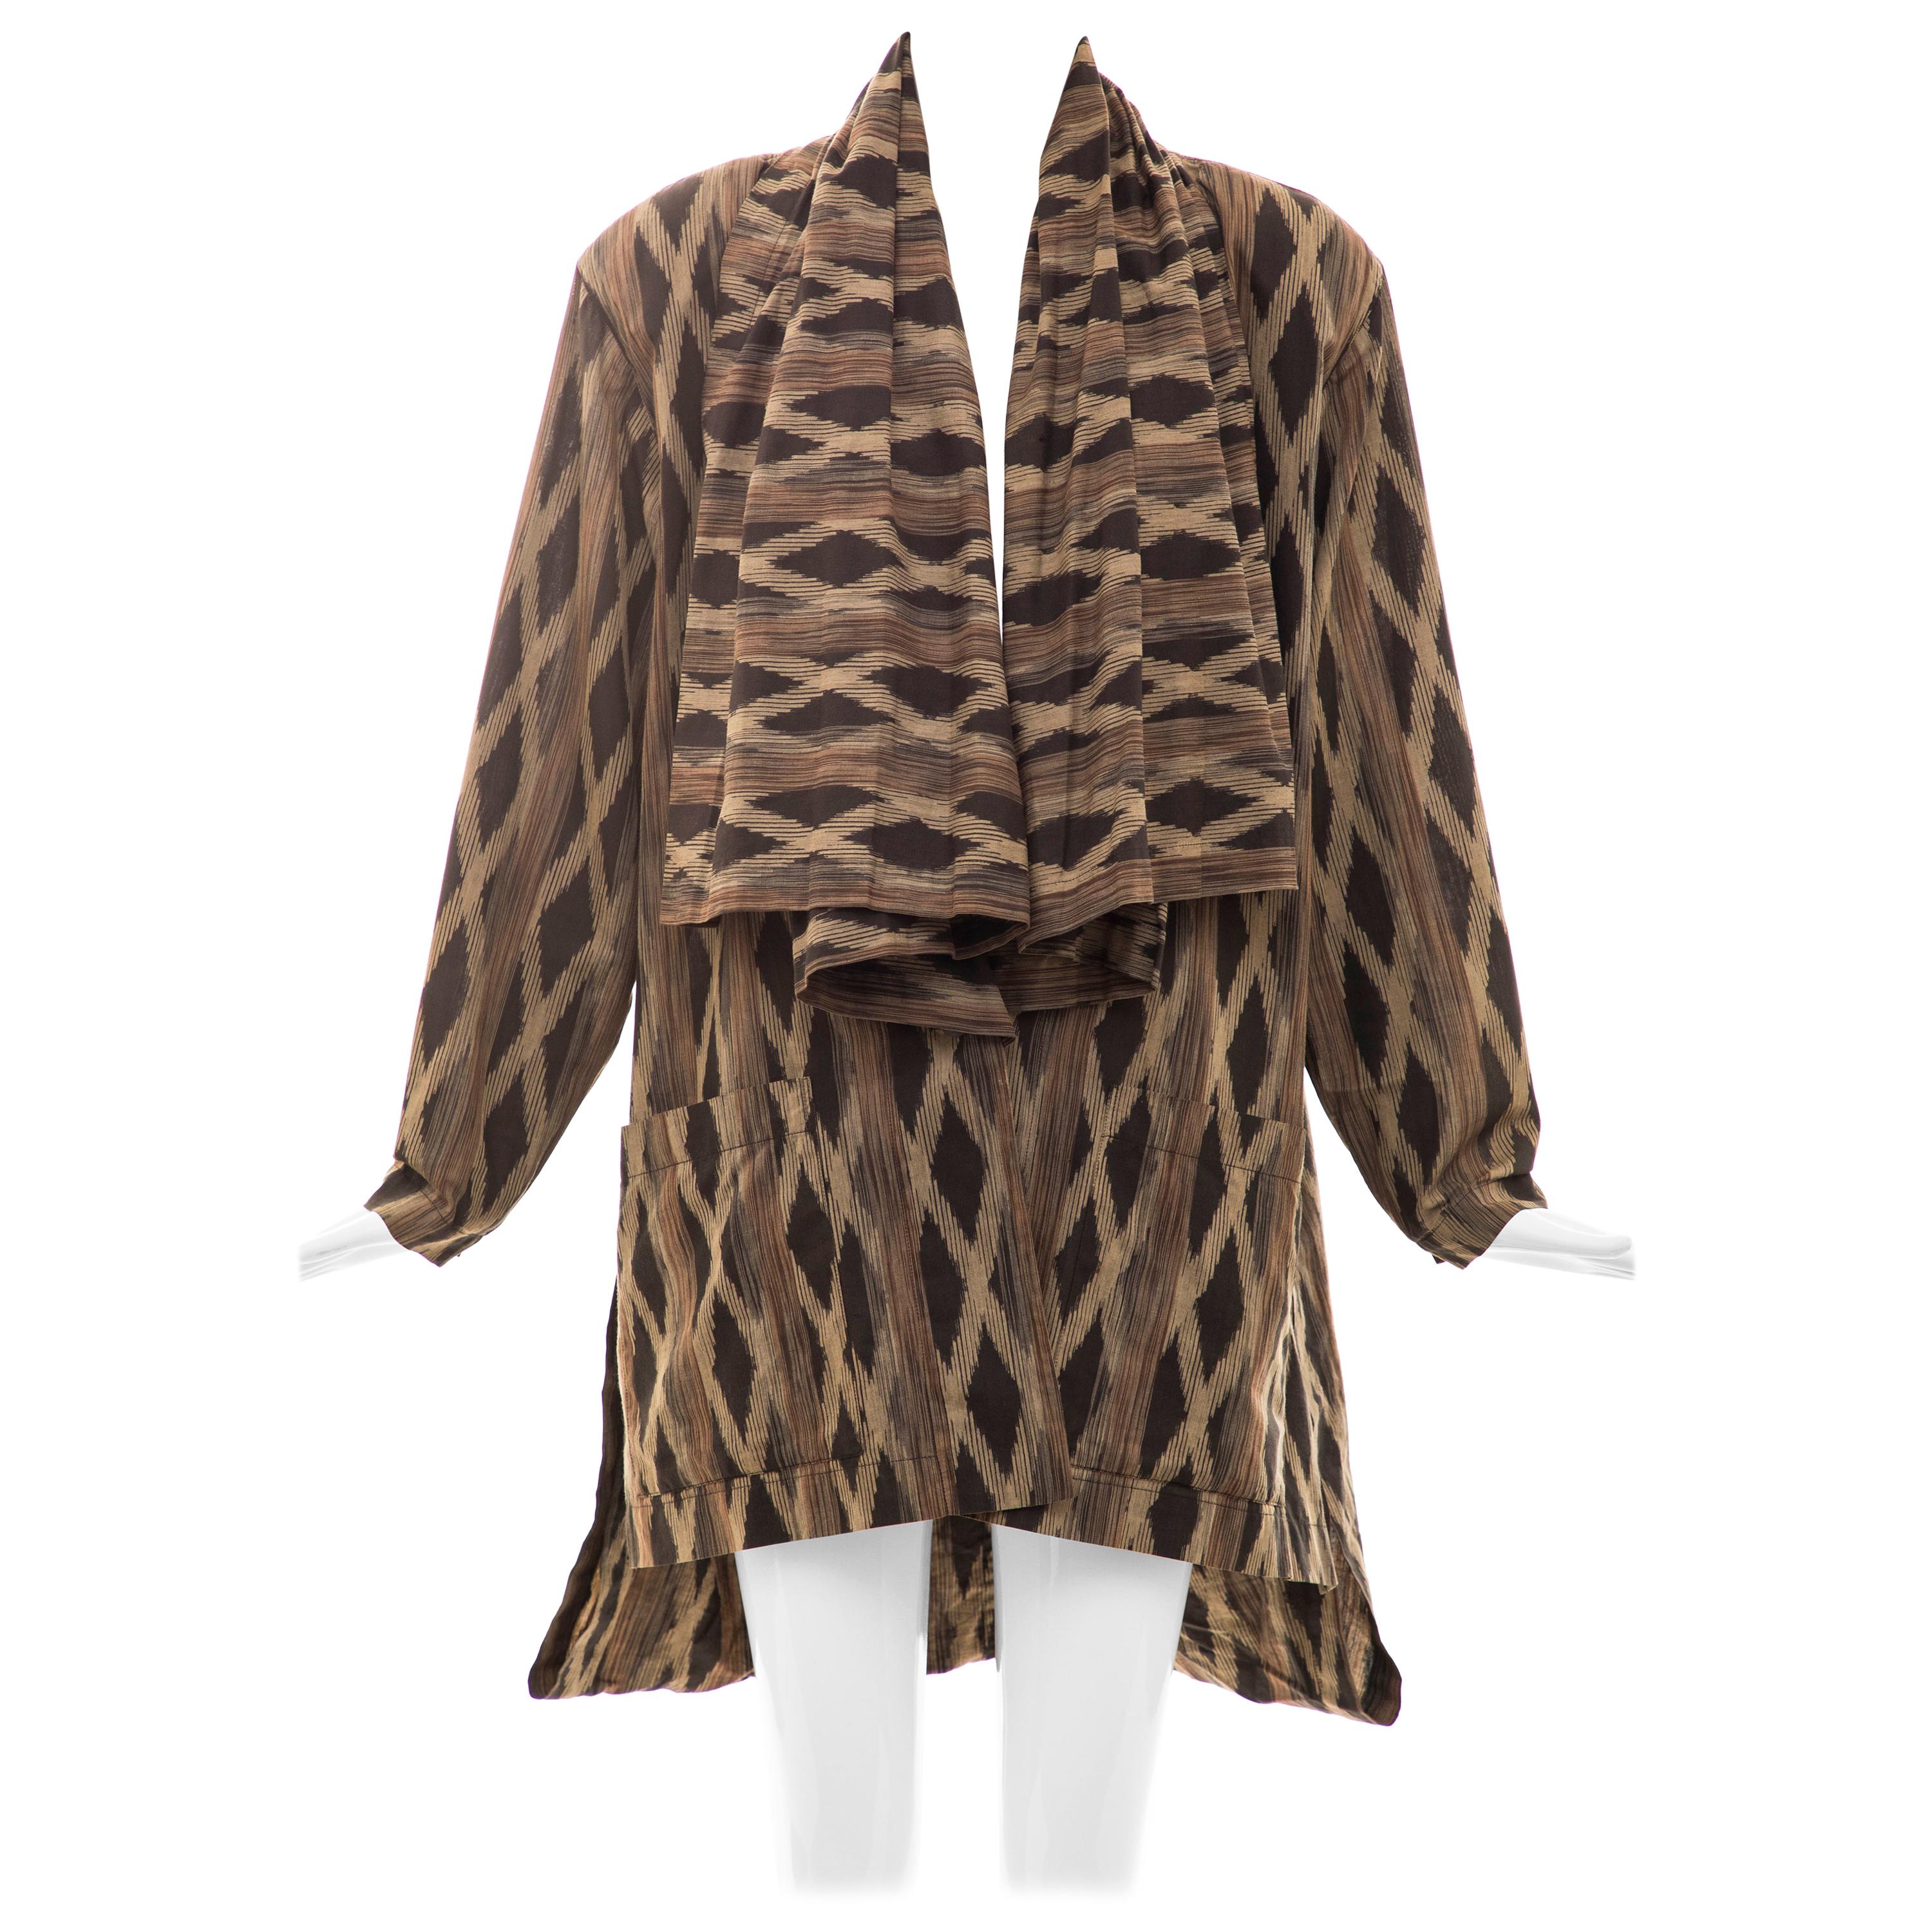 Issey Miyake Cotton Silk Lattice Weave Jacket Duster Cardigan, Fall 1986 For Sale